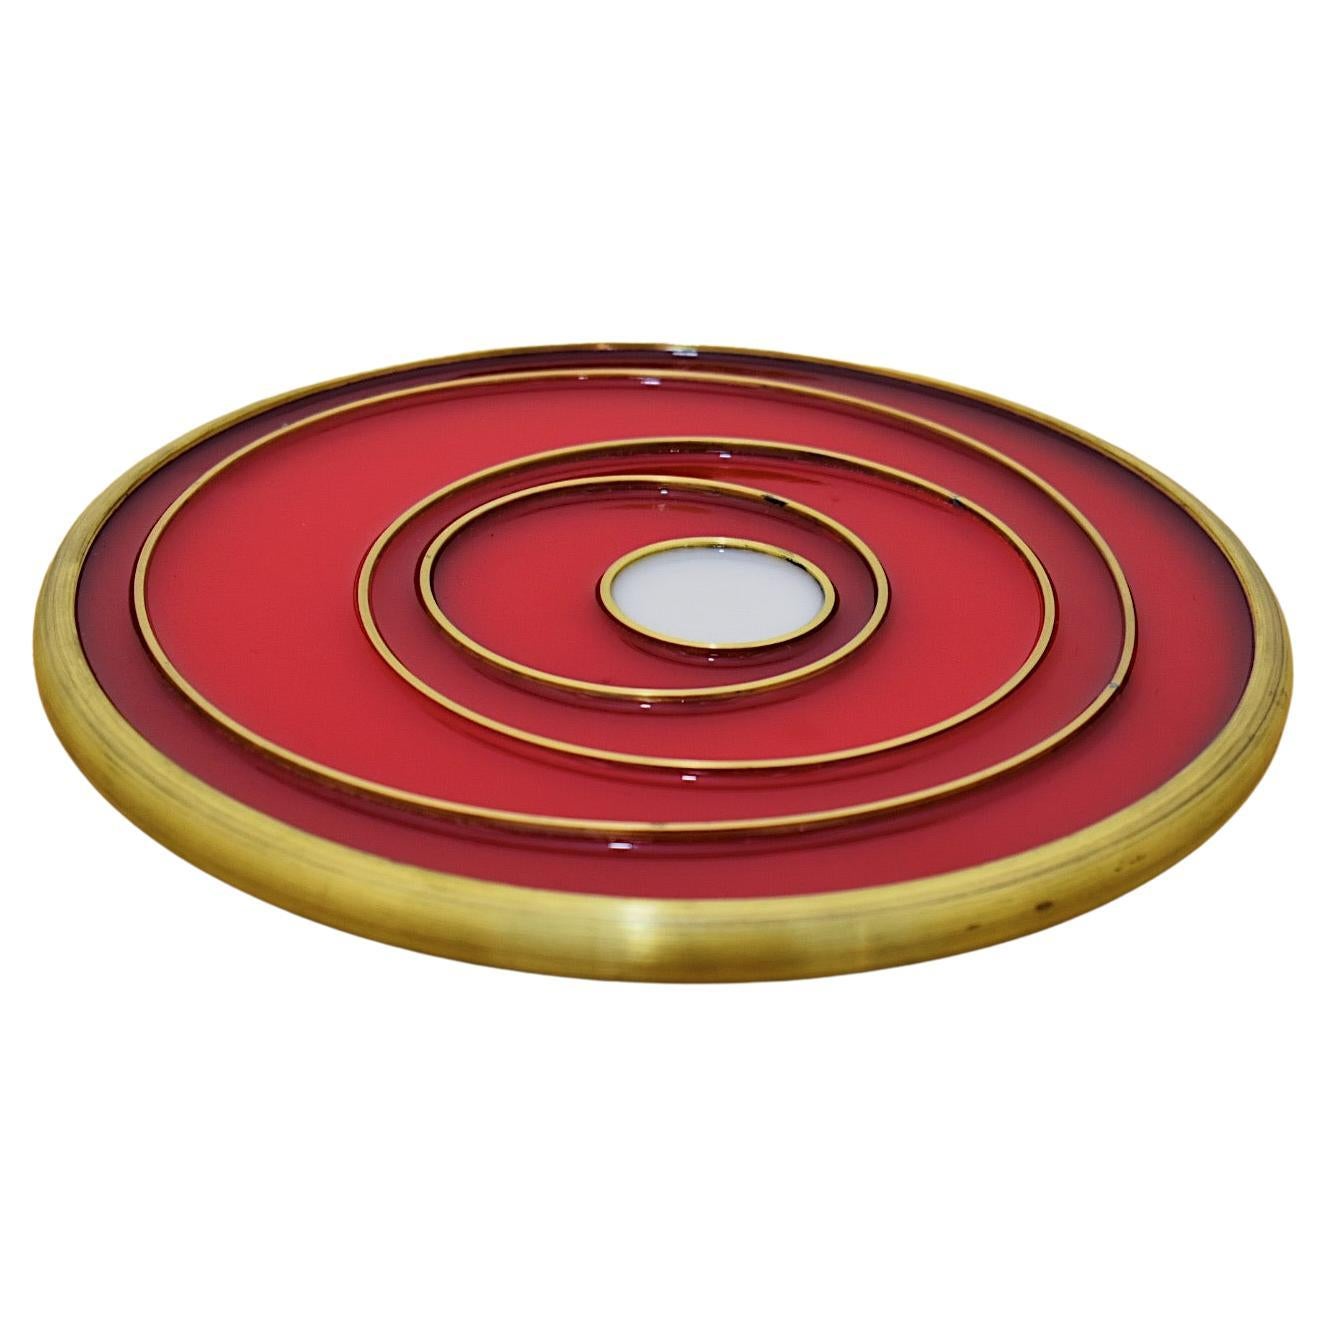 8" Brass Spun Trivet with Color Pop of Red and White by Daughter Mfg